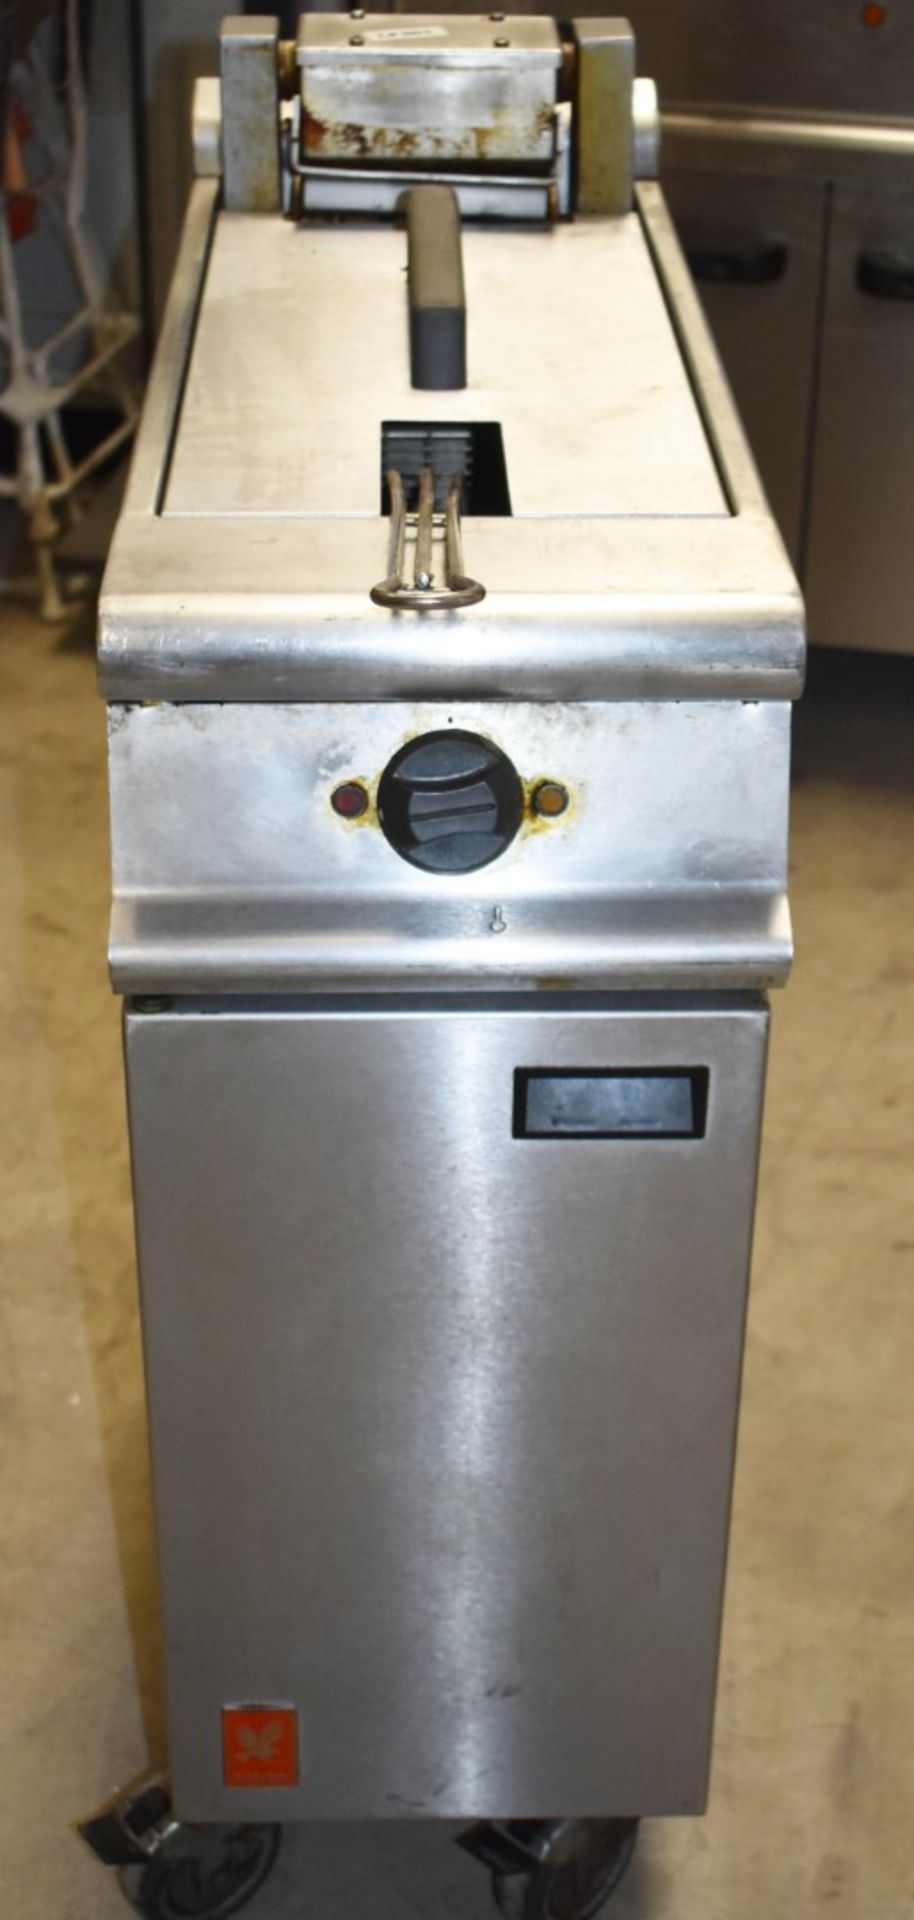 1 x Falcon Single Tank Electric 3 Phase Fryer With Frying Basket - H90 x W30 x D77 cms - CL232 - Ref